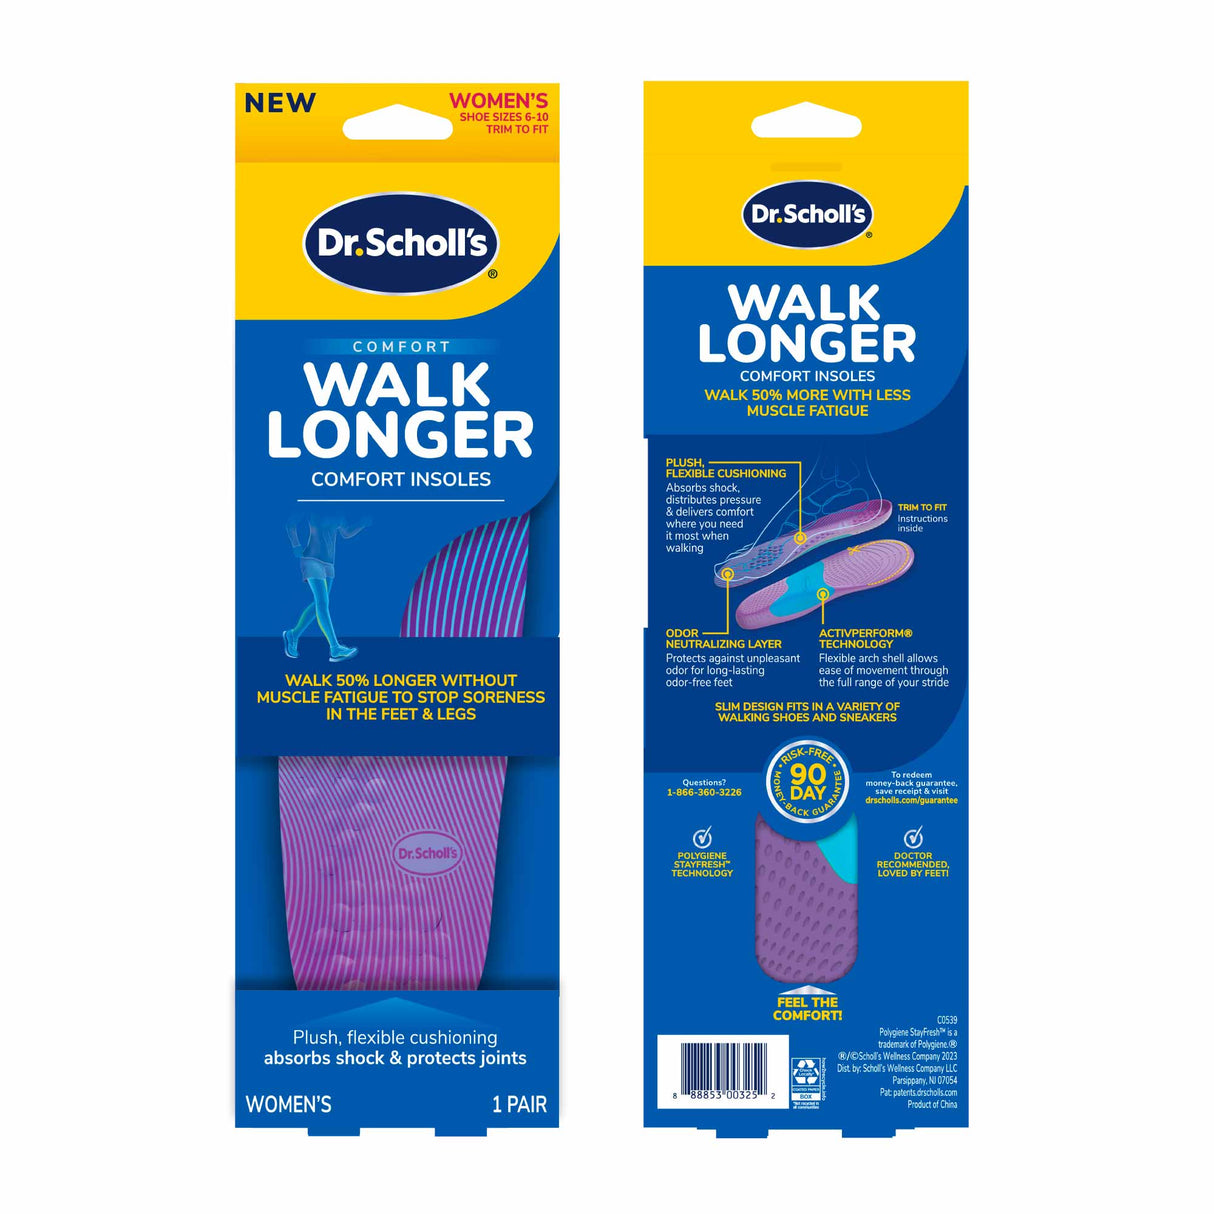 image of the front and back of packaging of the walk longer insole